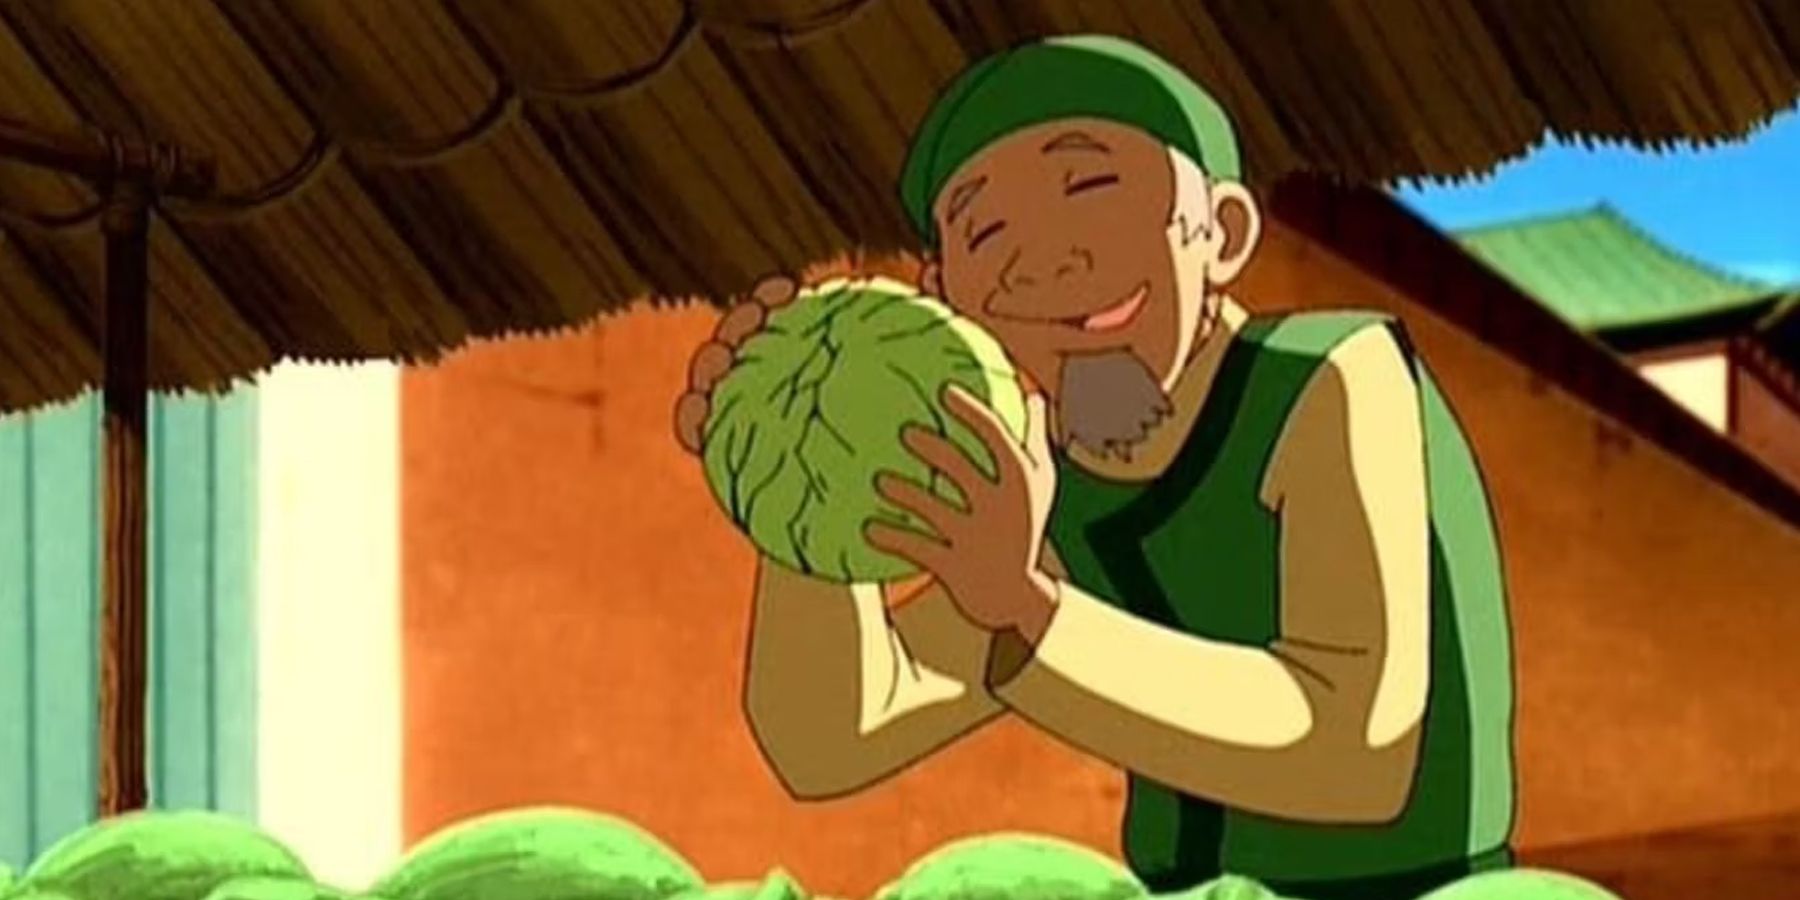 Cabbage Man in Avatar the Last Airbender